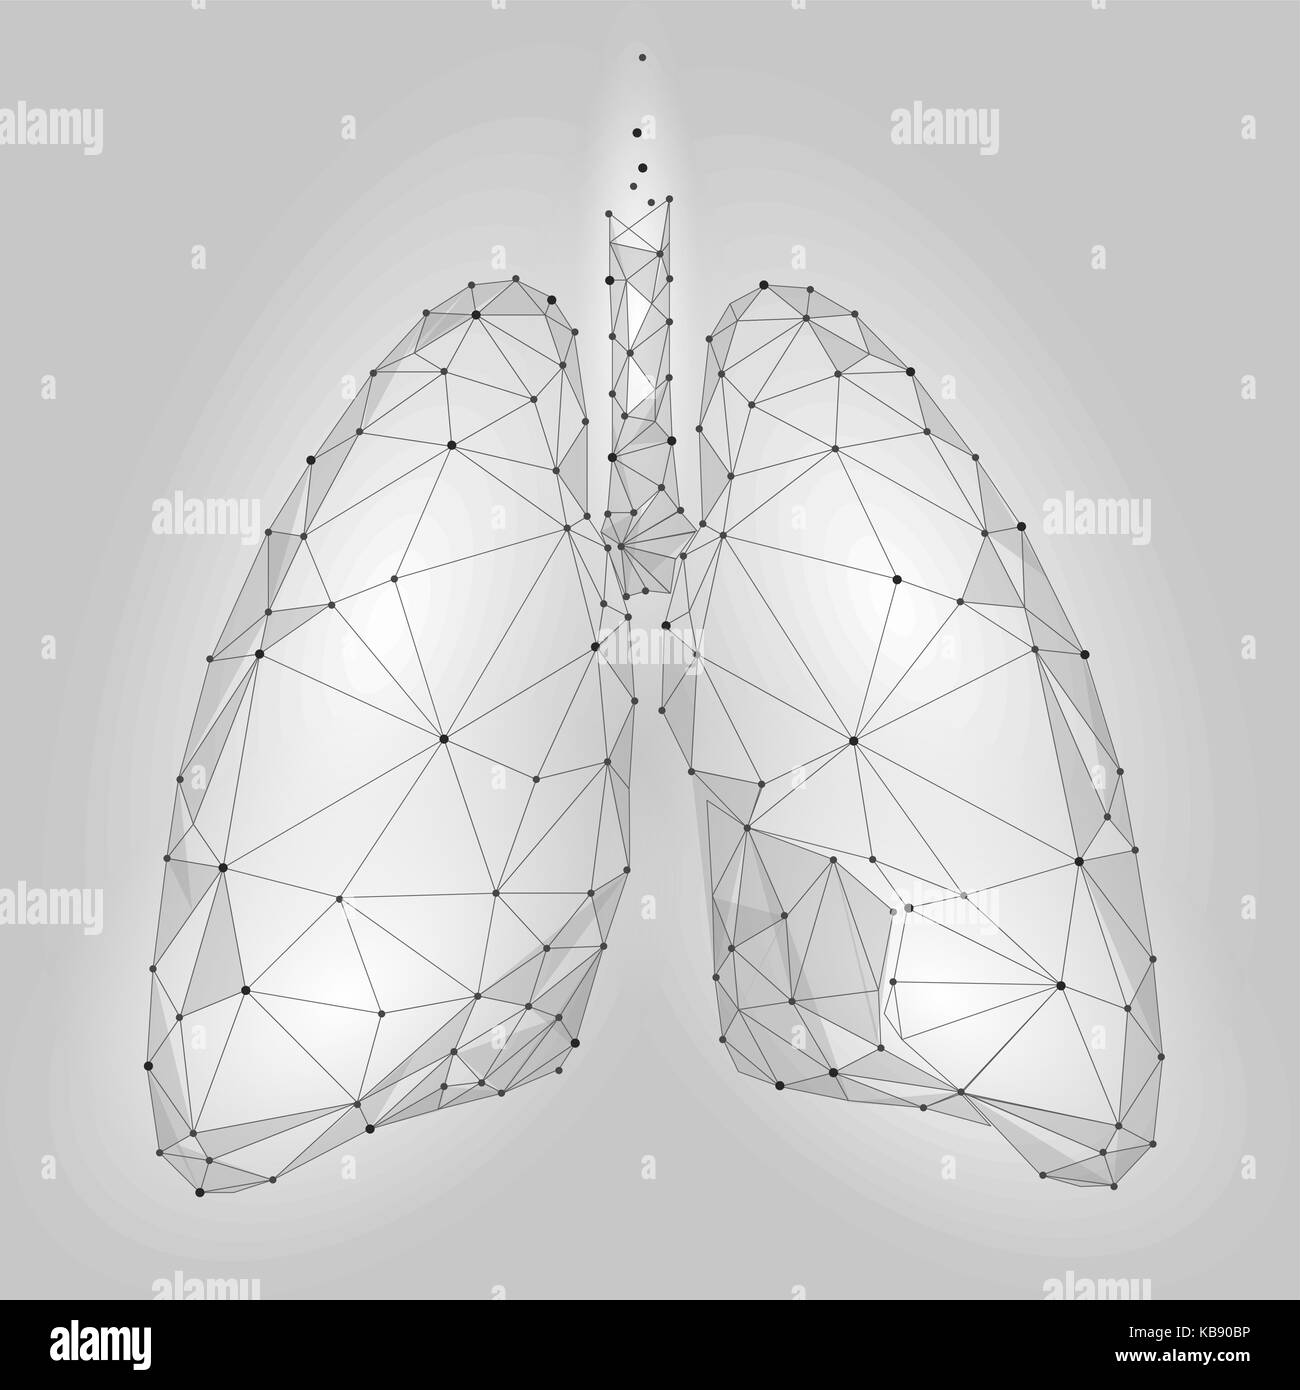 Human Internal Organ Lungs. Low Poly technology design. White Gray color polygonal triangle connected dots. Health medicine icon background vector illustration Stock Vector